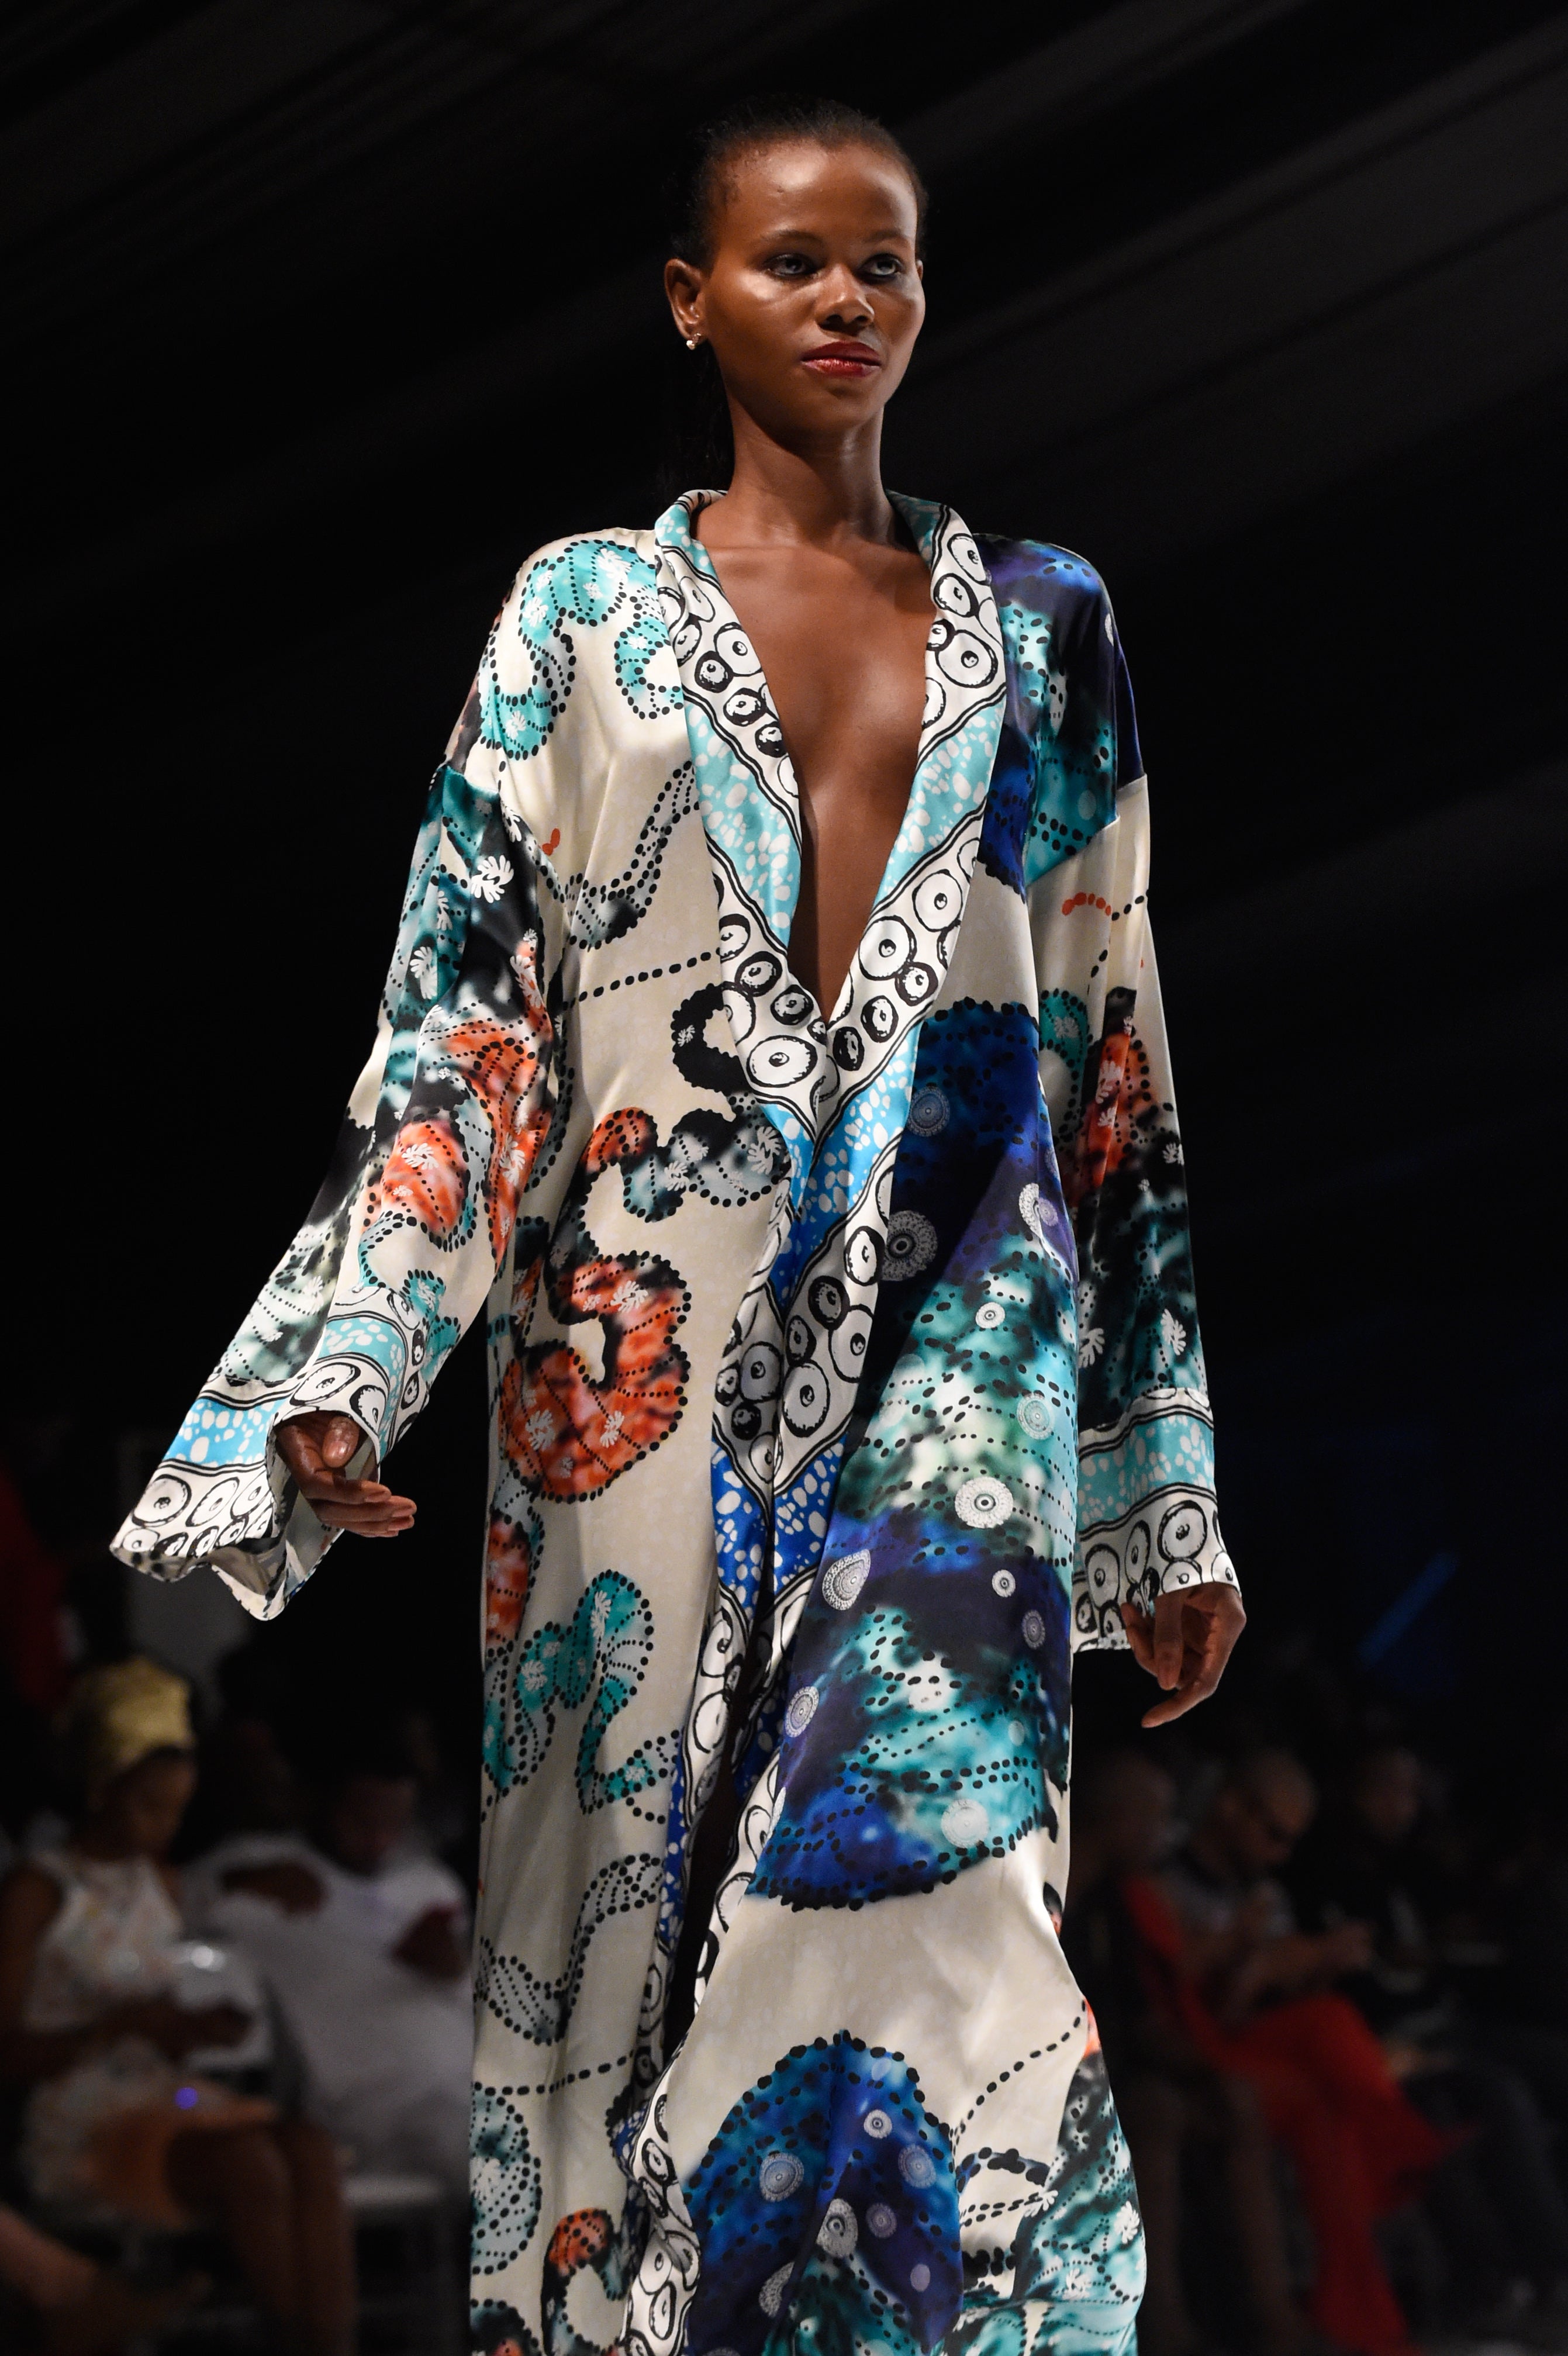 19 Stunning Images From Day 1 Of Lagos Fashion Week In Nigeria | Essence